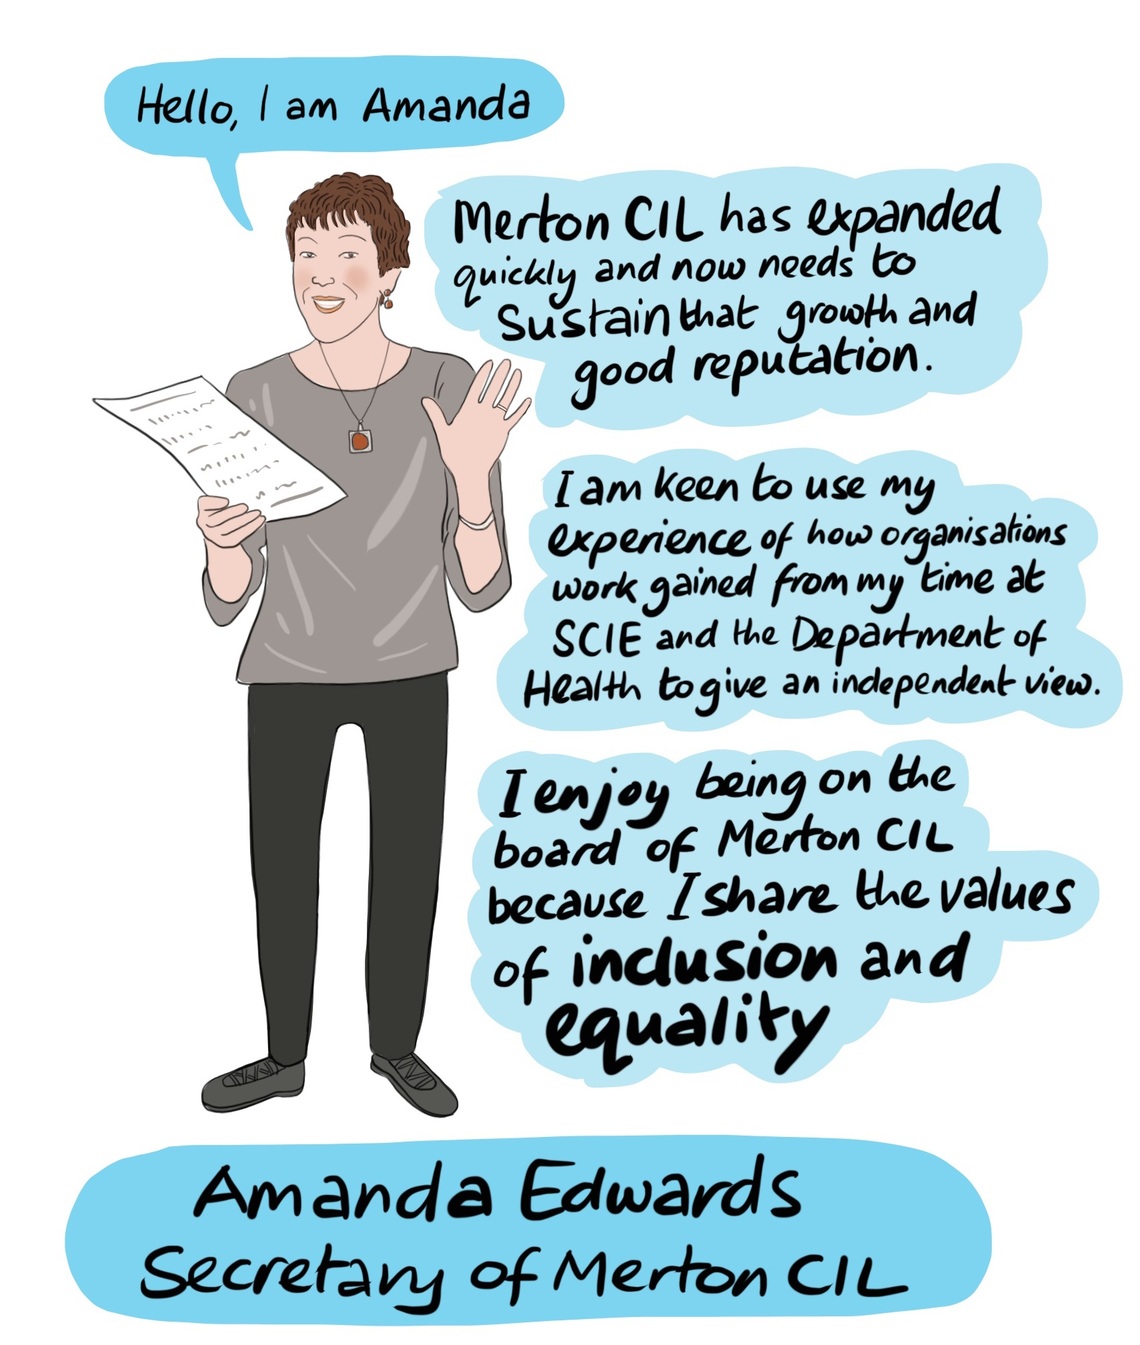 Amanda - The values of inclusion and equality which are the basis of our work, drew Amanda to join Merton CIL as they are ones that she has shared throughout her working life. She has seen the difference that a strong voice and good support can make to people’s lives from her time as a manager and social worker in South London. Also during her time working on policy at the Department of Health and most recently at SCIE with people who use services as board members and on committees to produce good practice advice and guidance. Merton CIL has expanded quickly and now needs to sustain that growth and good reputation amd Amanda is keen to use her experience of how organisations work to give an independent view.